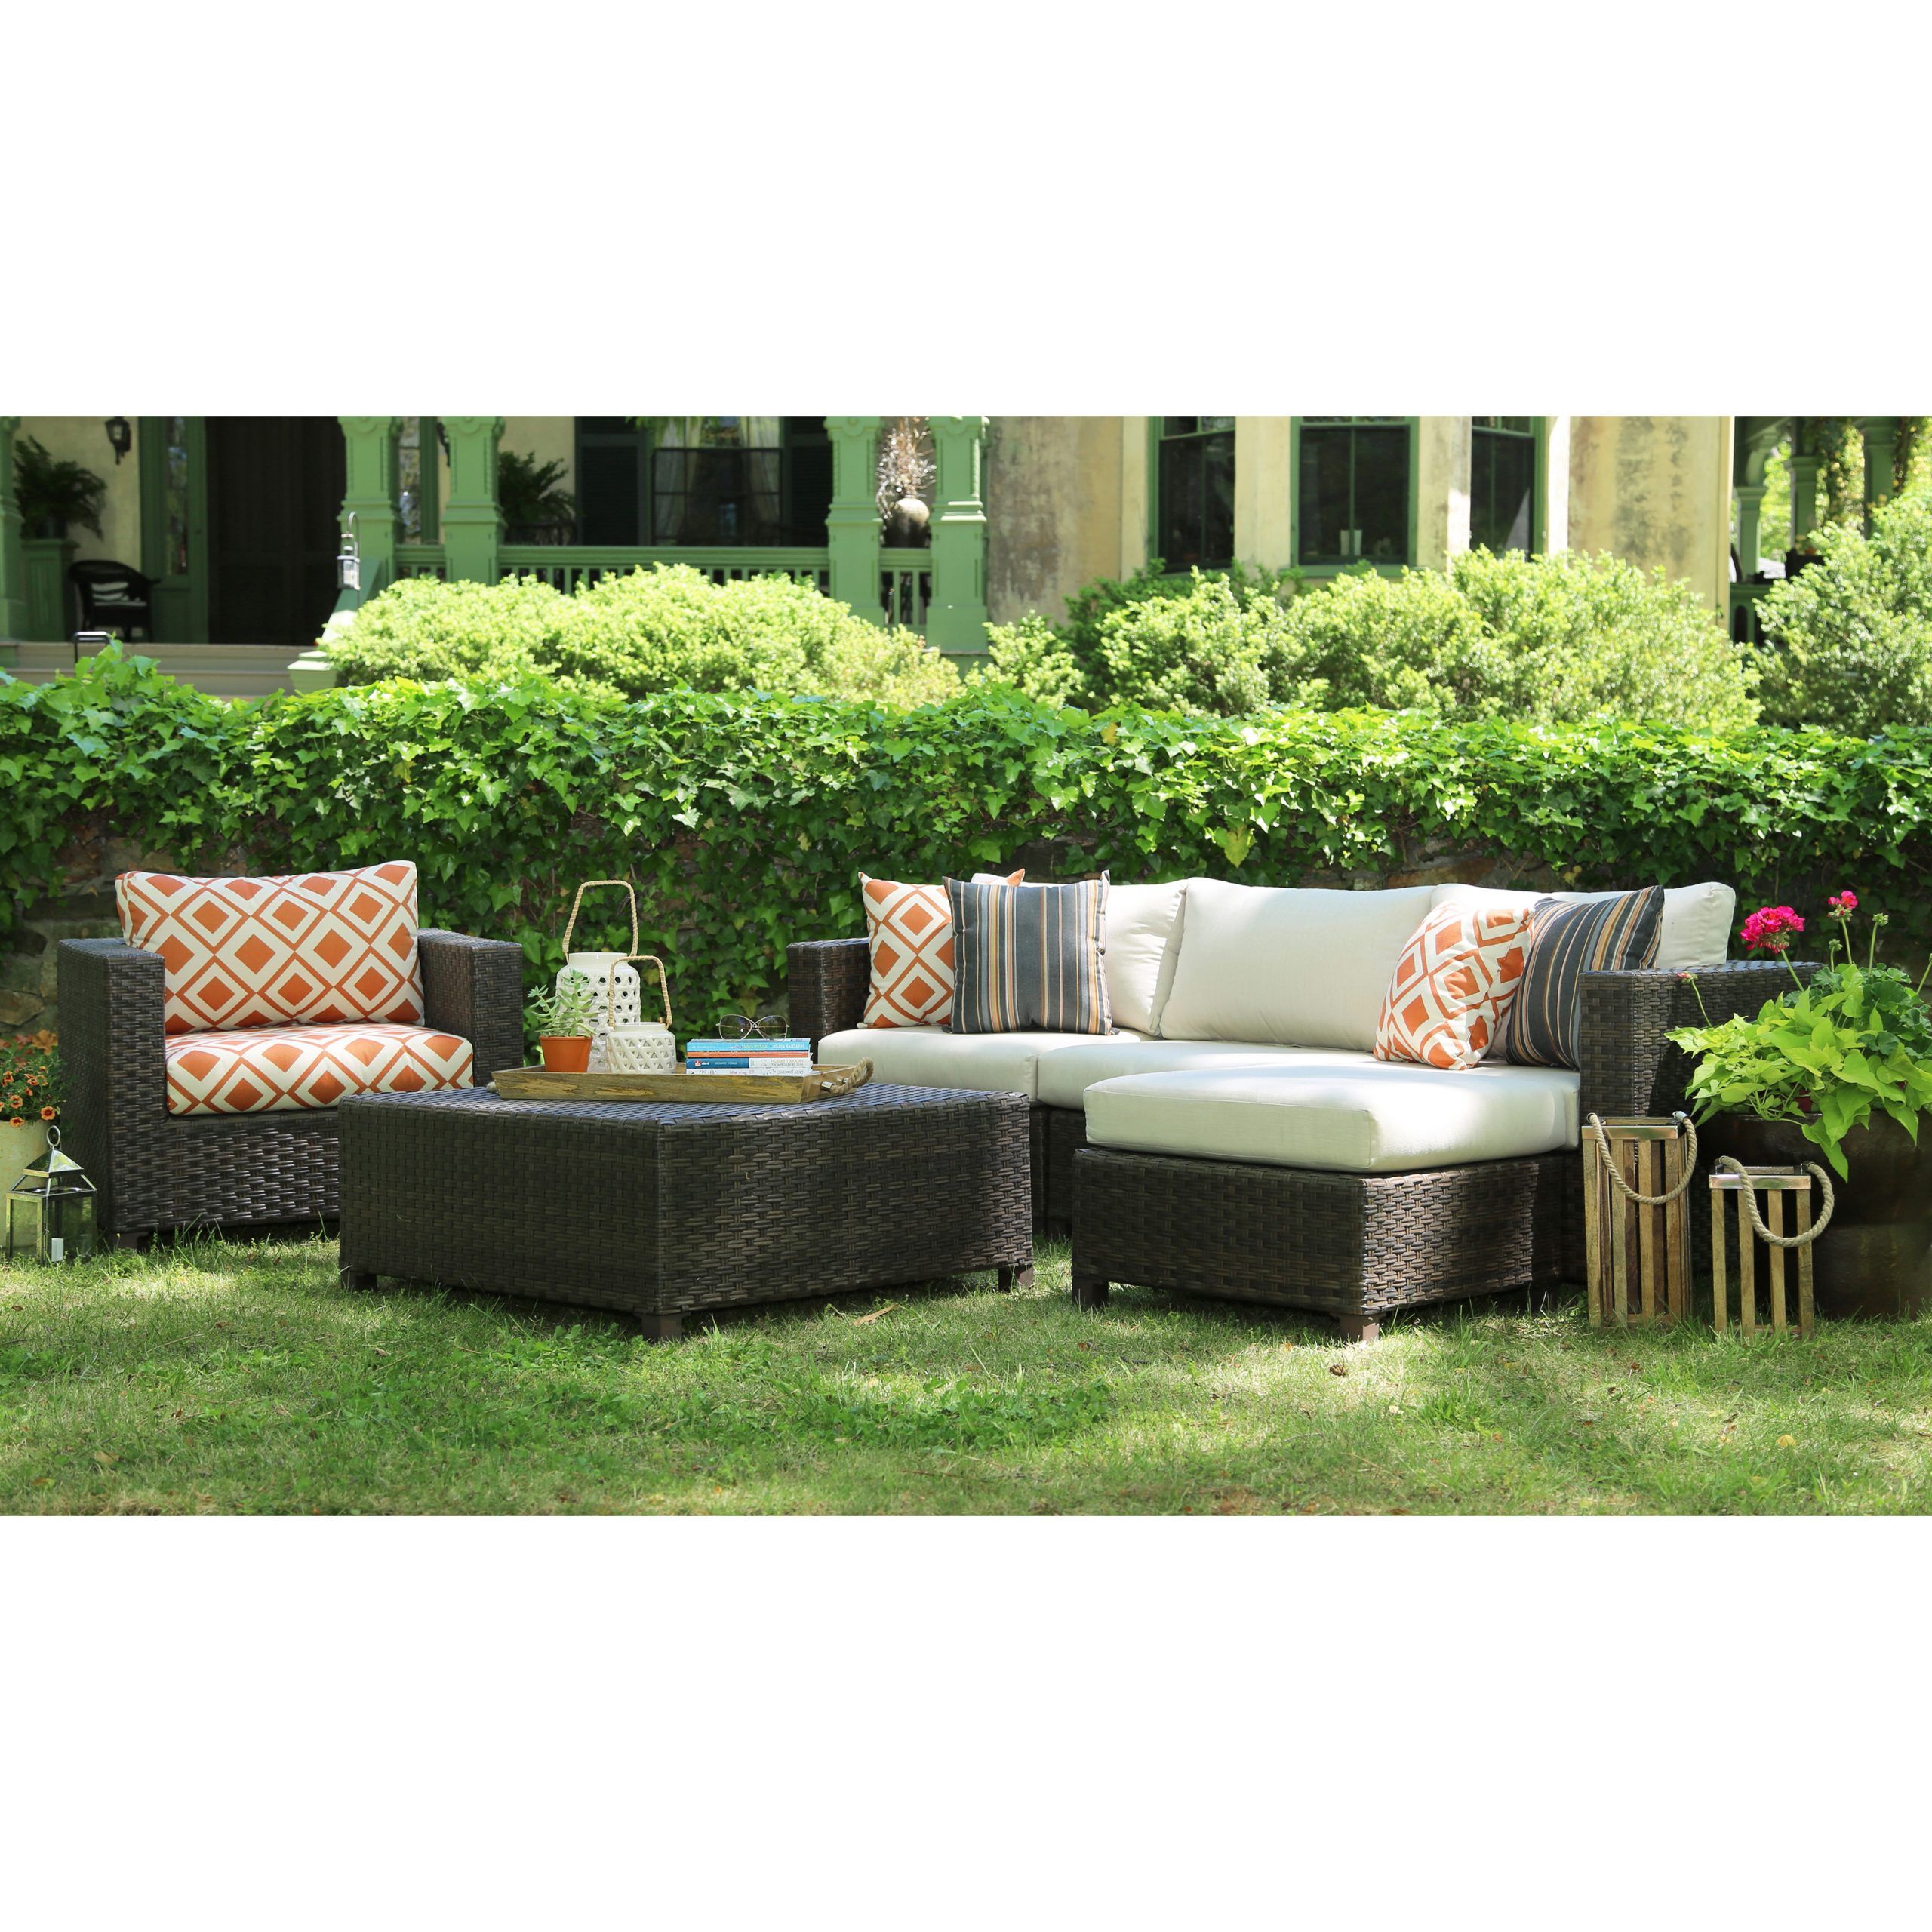 4 Piece Outdoor Seating Patio Sets In Most Up To Date Ae Outdoor Biscayne 4 Piece Deep Seating Conversation Set (View 6 of 15)